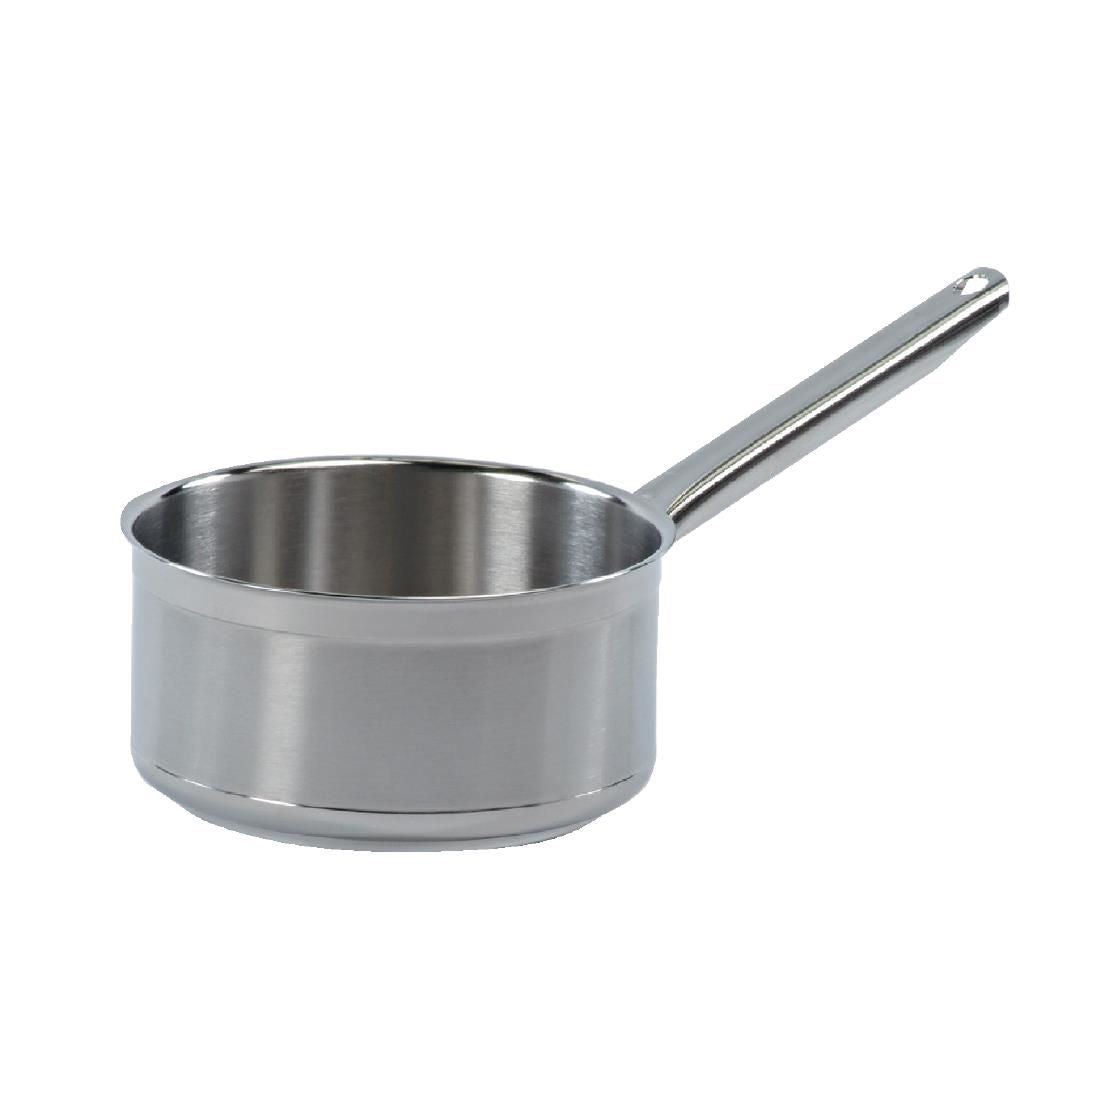 Bourgeat Tradition Plus Stainless Steel Saucepan 3.3Ltr JD Catering Equipment Solutions Ltd